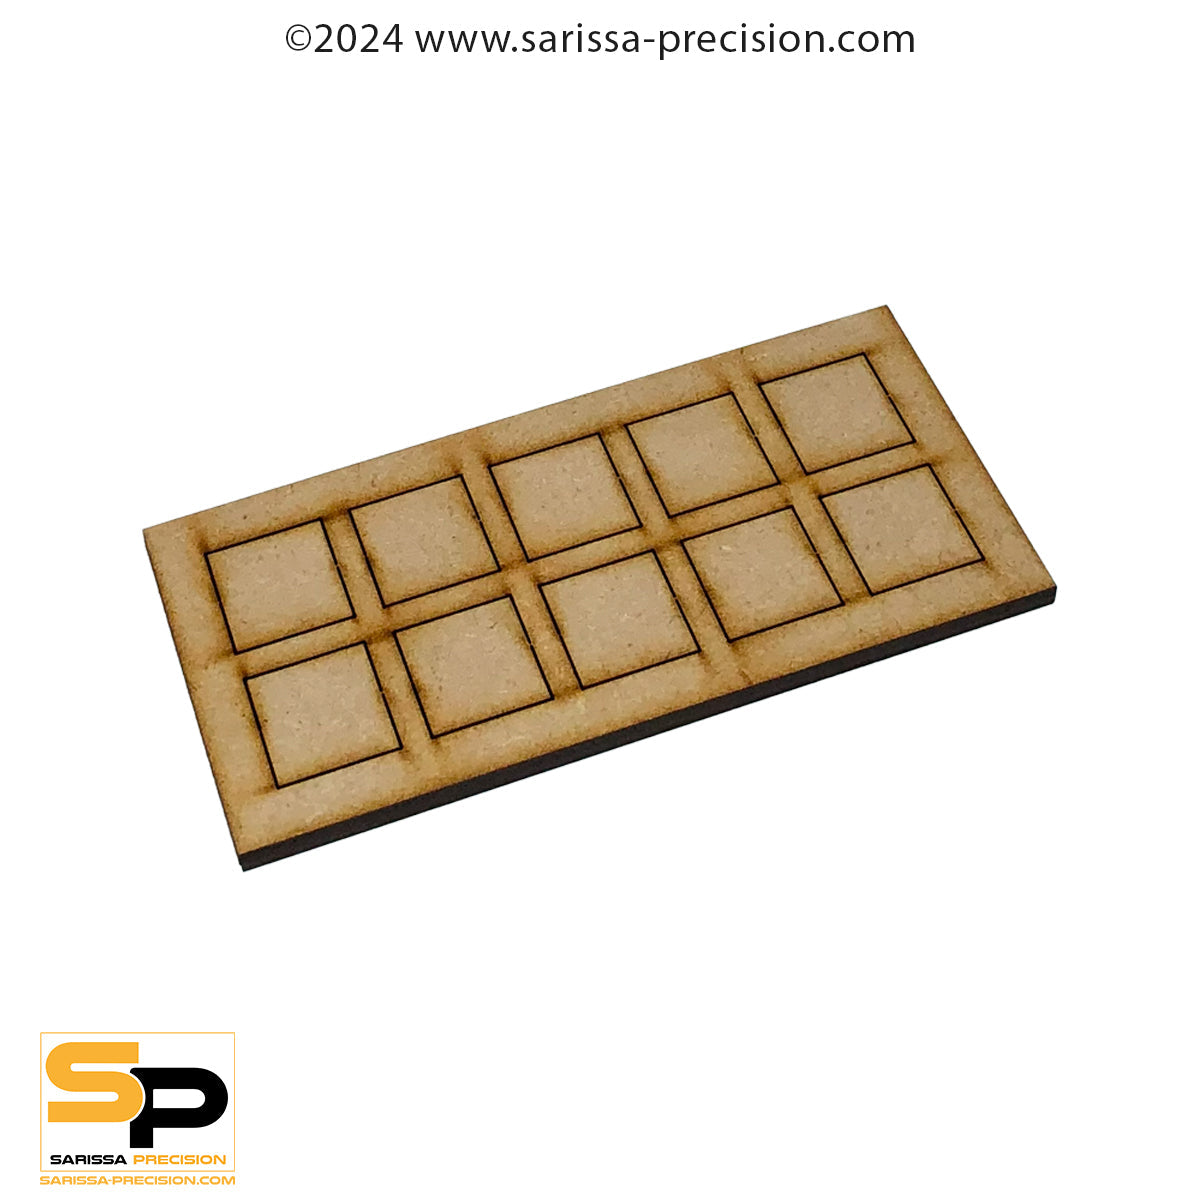 15x12 25x25mm Conversion Tray for 20x20mm bases